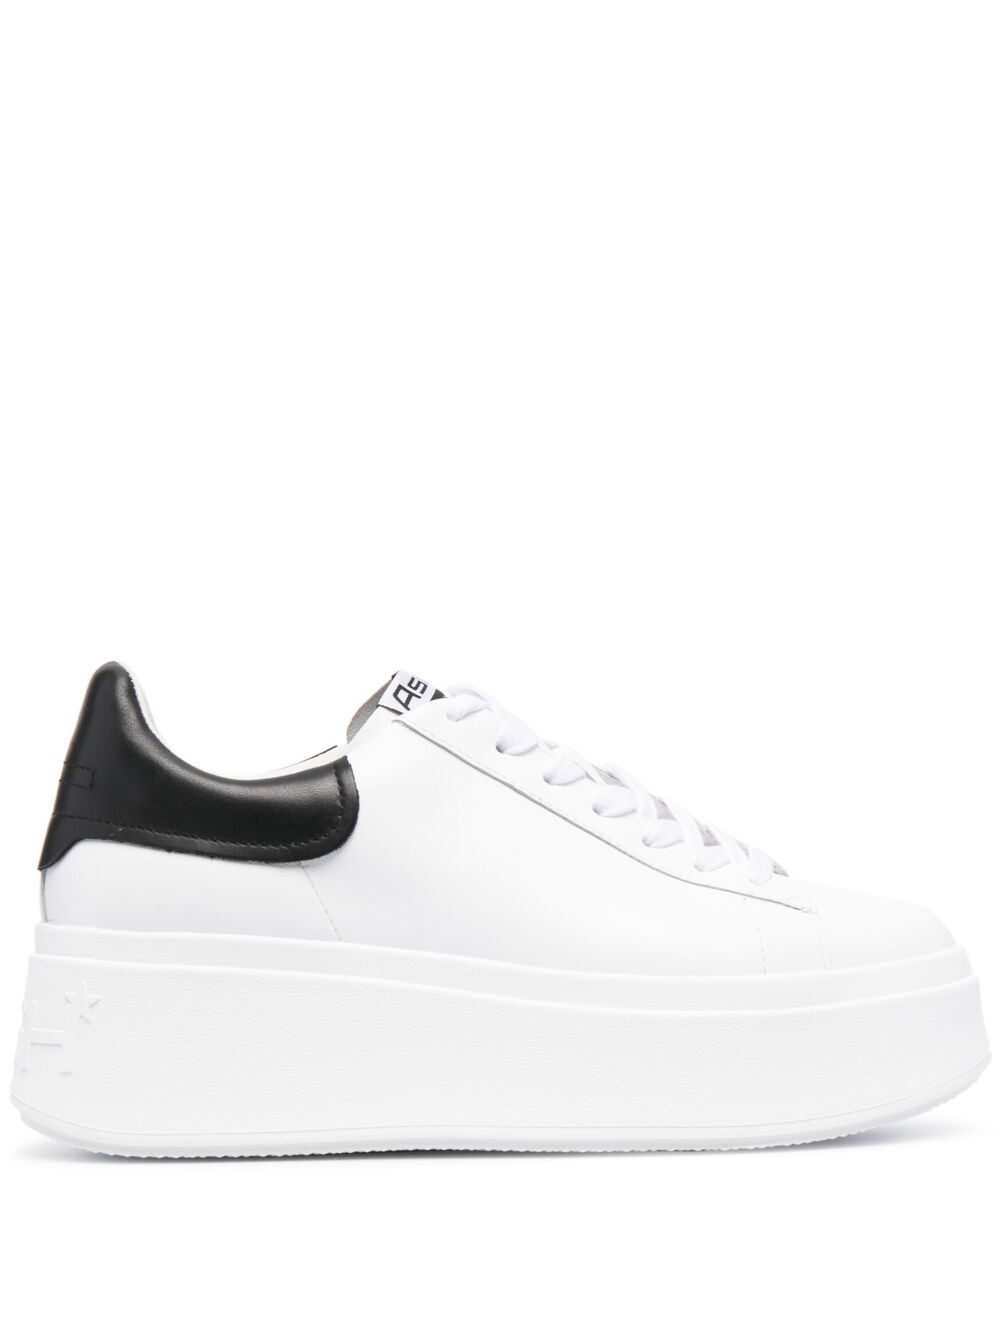 Moby Leather Sneakers дамски обувки Ash 840881141_40